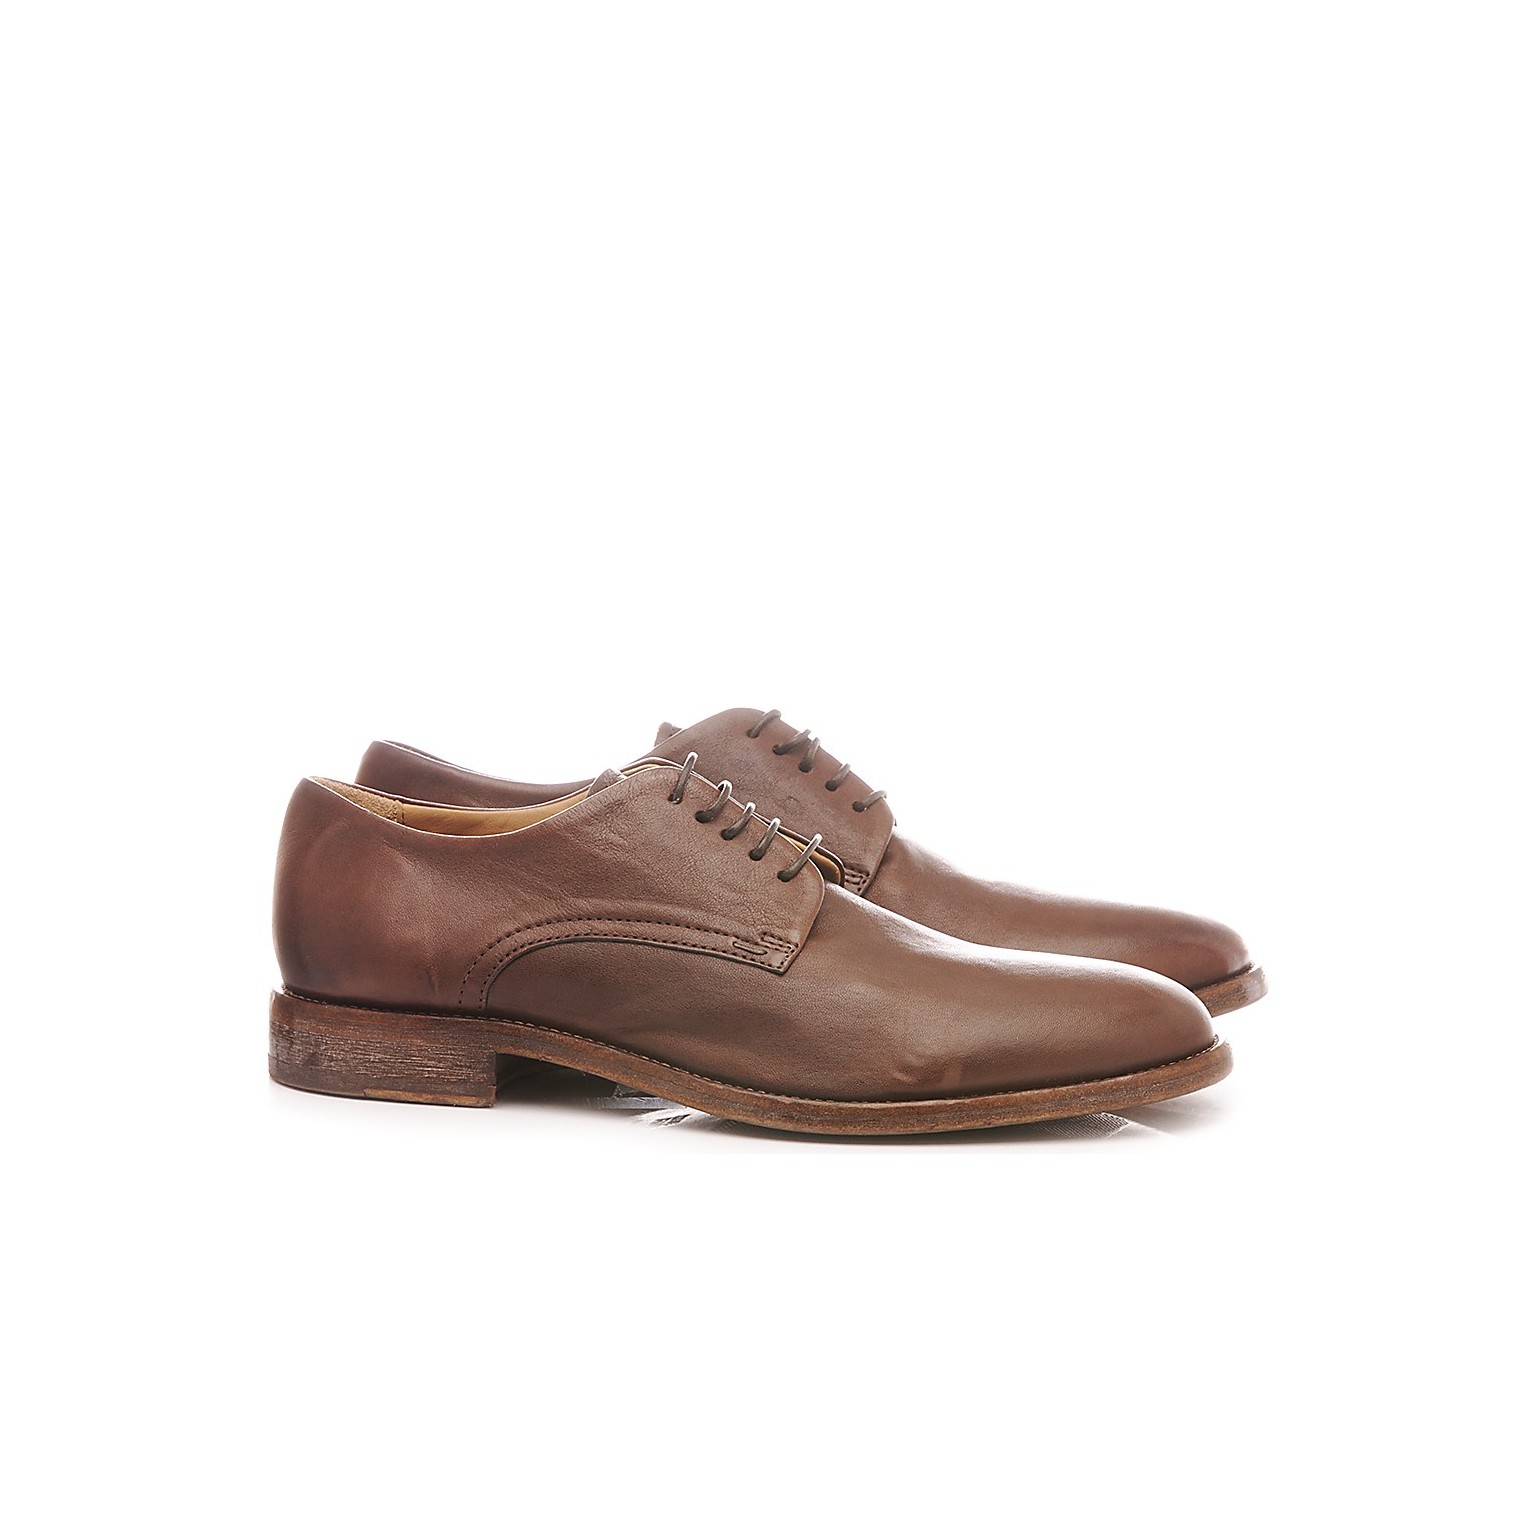 Moma Men's Shoes Leather Brown 2AS019-LU